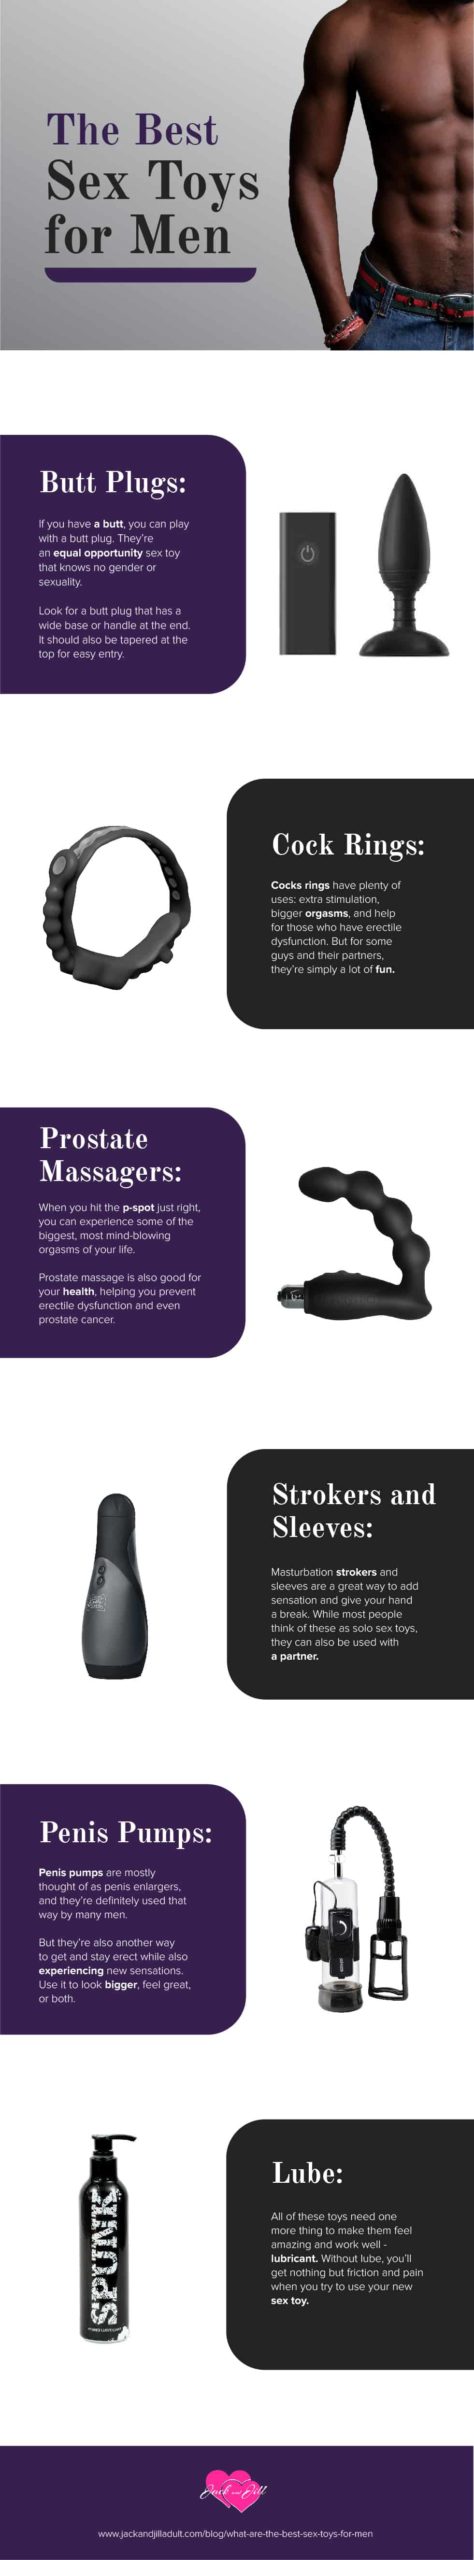 Infographic for What are the Best Sex Toys for Men